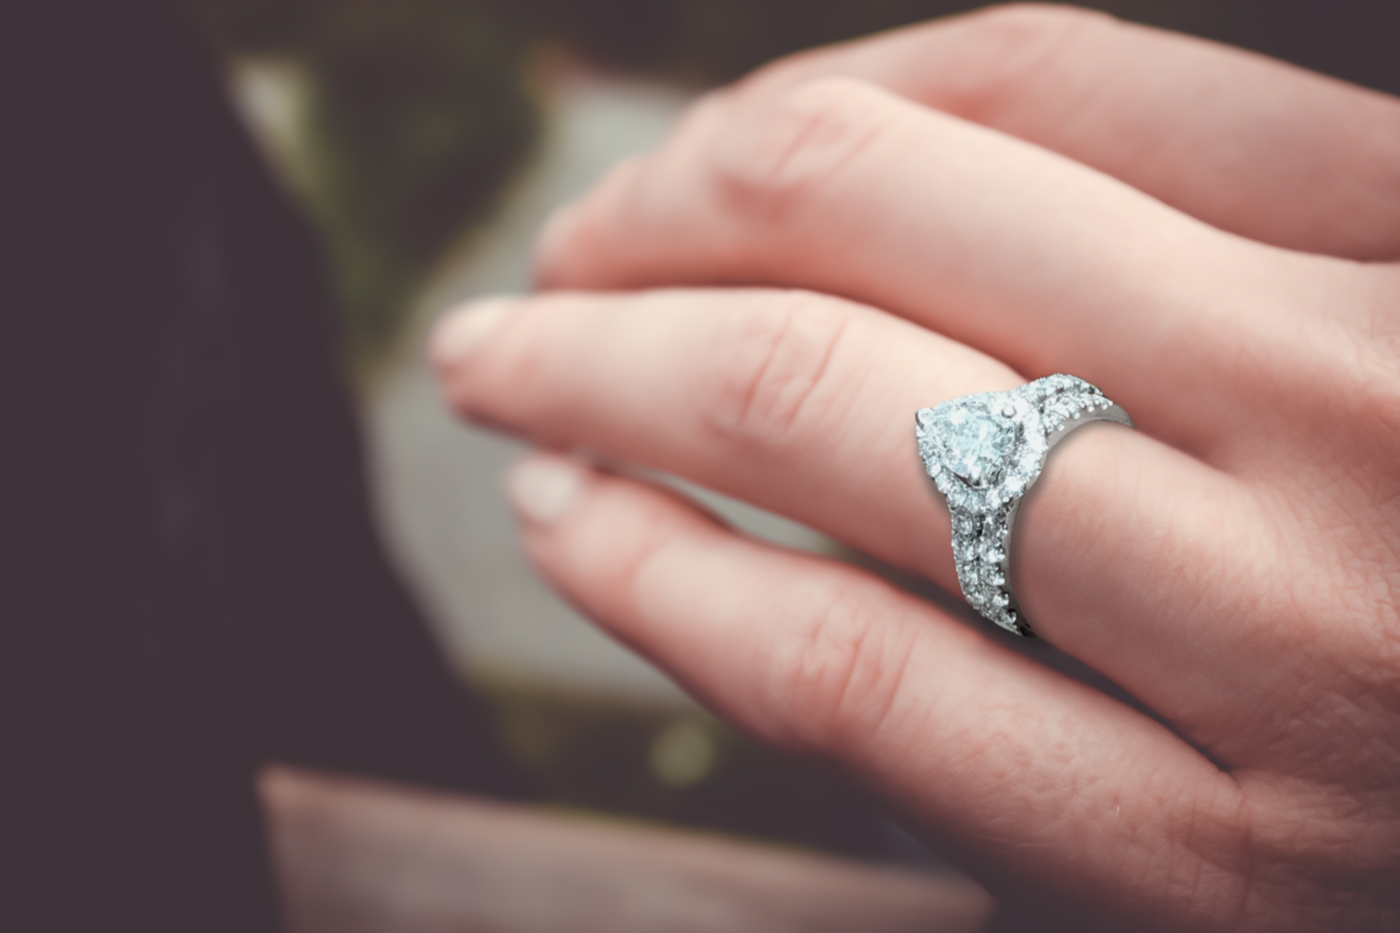 Insuring your Engagement Ring. Is it worth it?